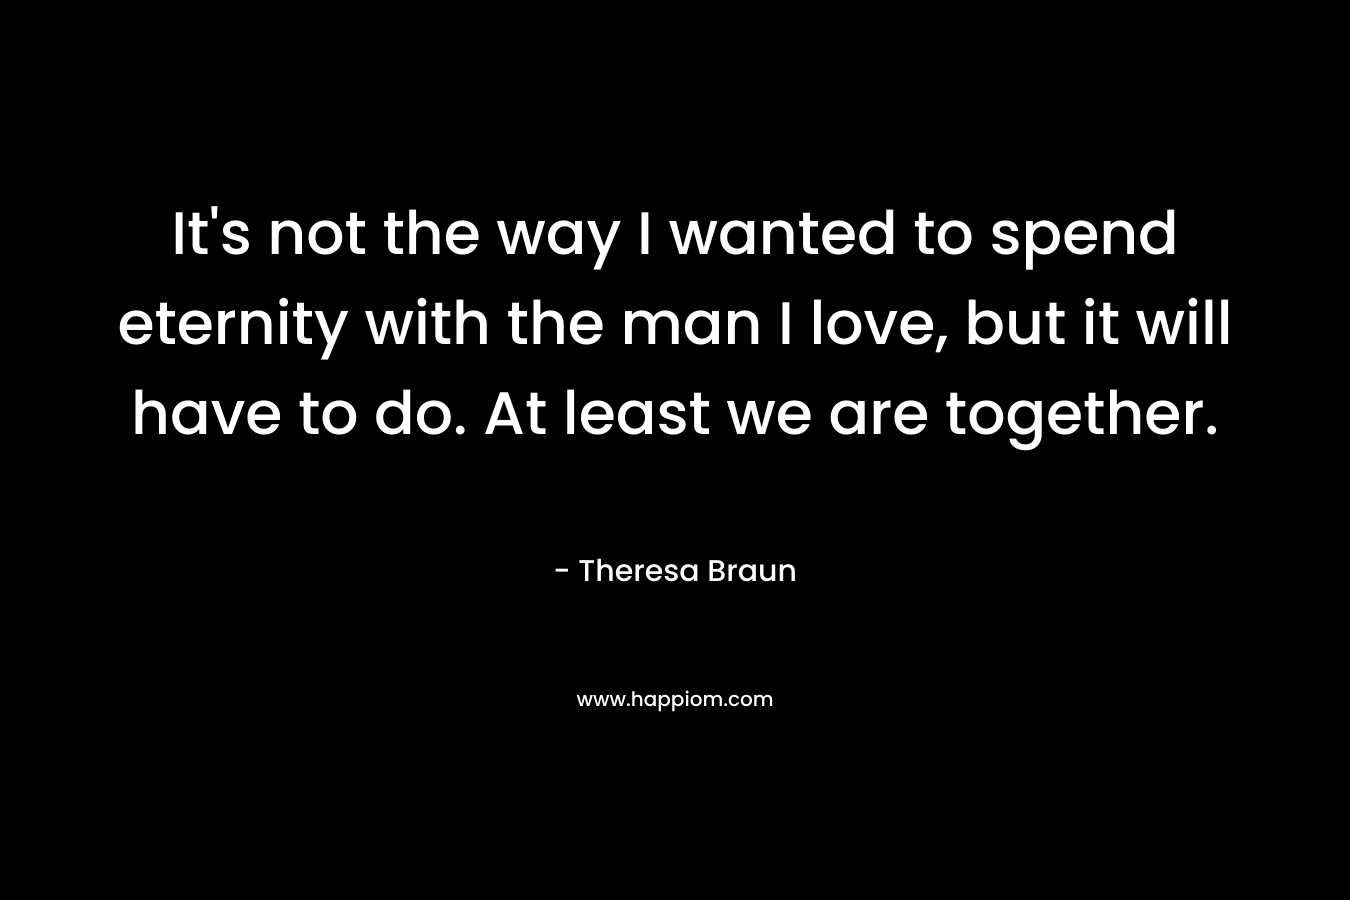 It’s not the way I wanted to spend eternity with the man I love, but it will have to do. At least we are together. – Theresa Braun